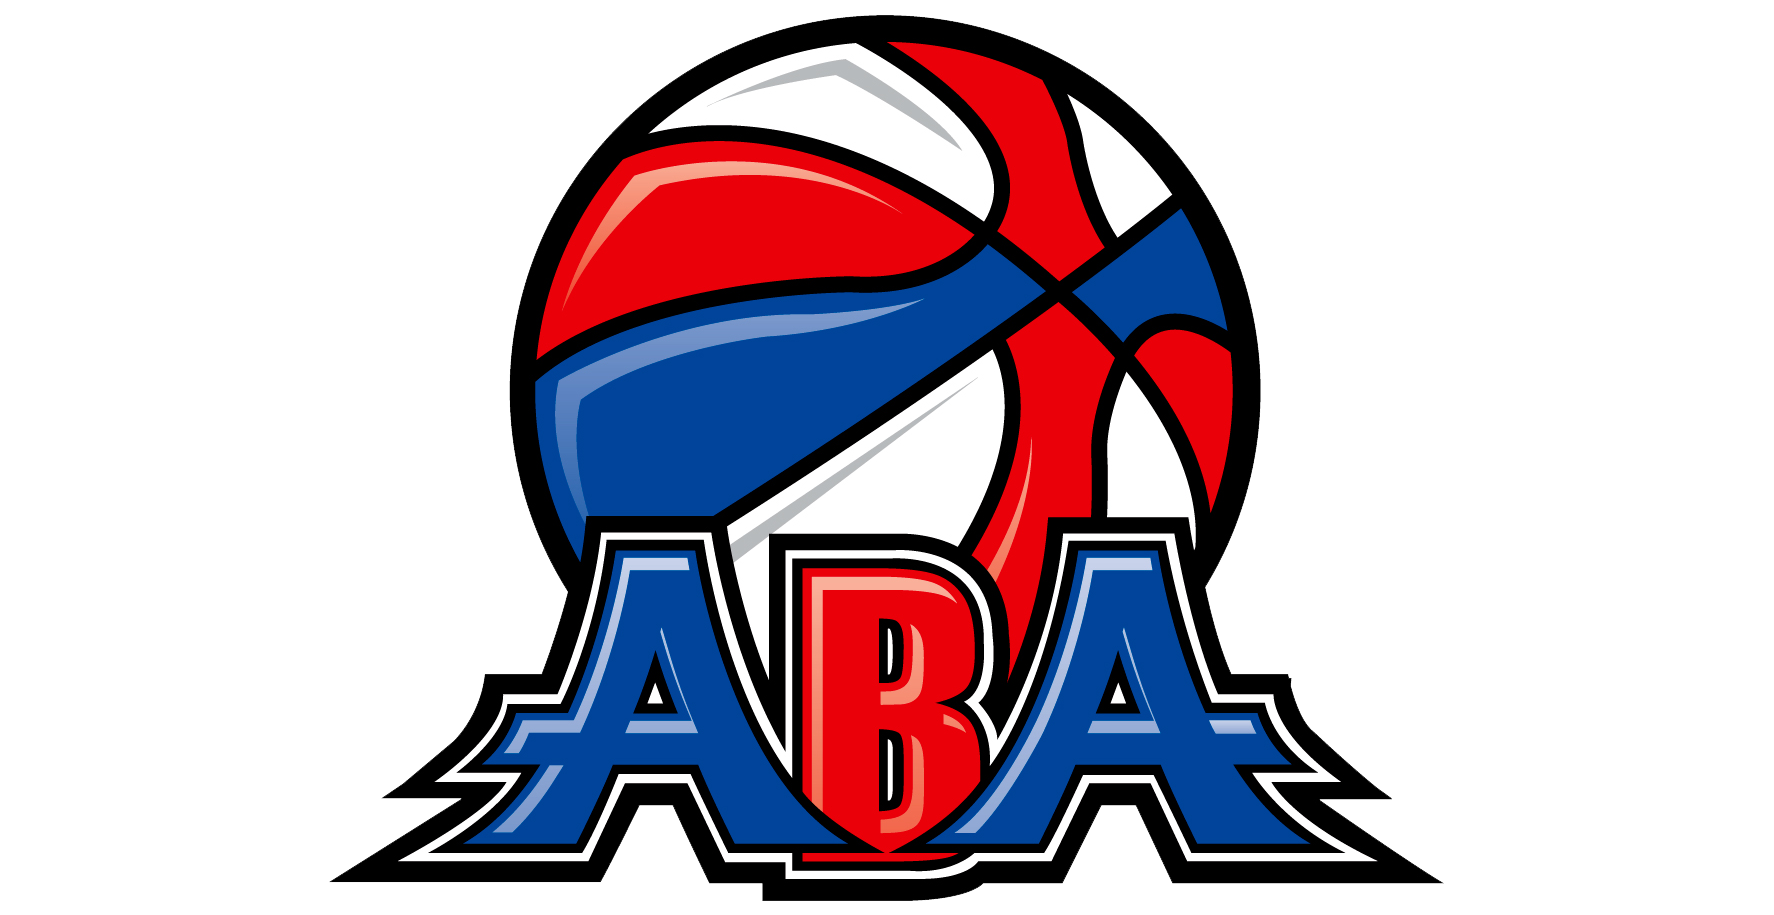 ABA Logo, ABA Symbol Meaning, History and Evolution